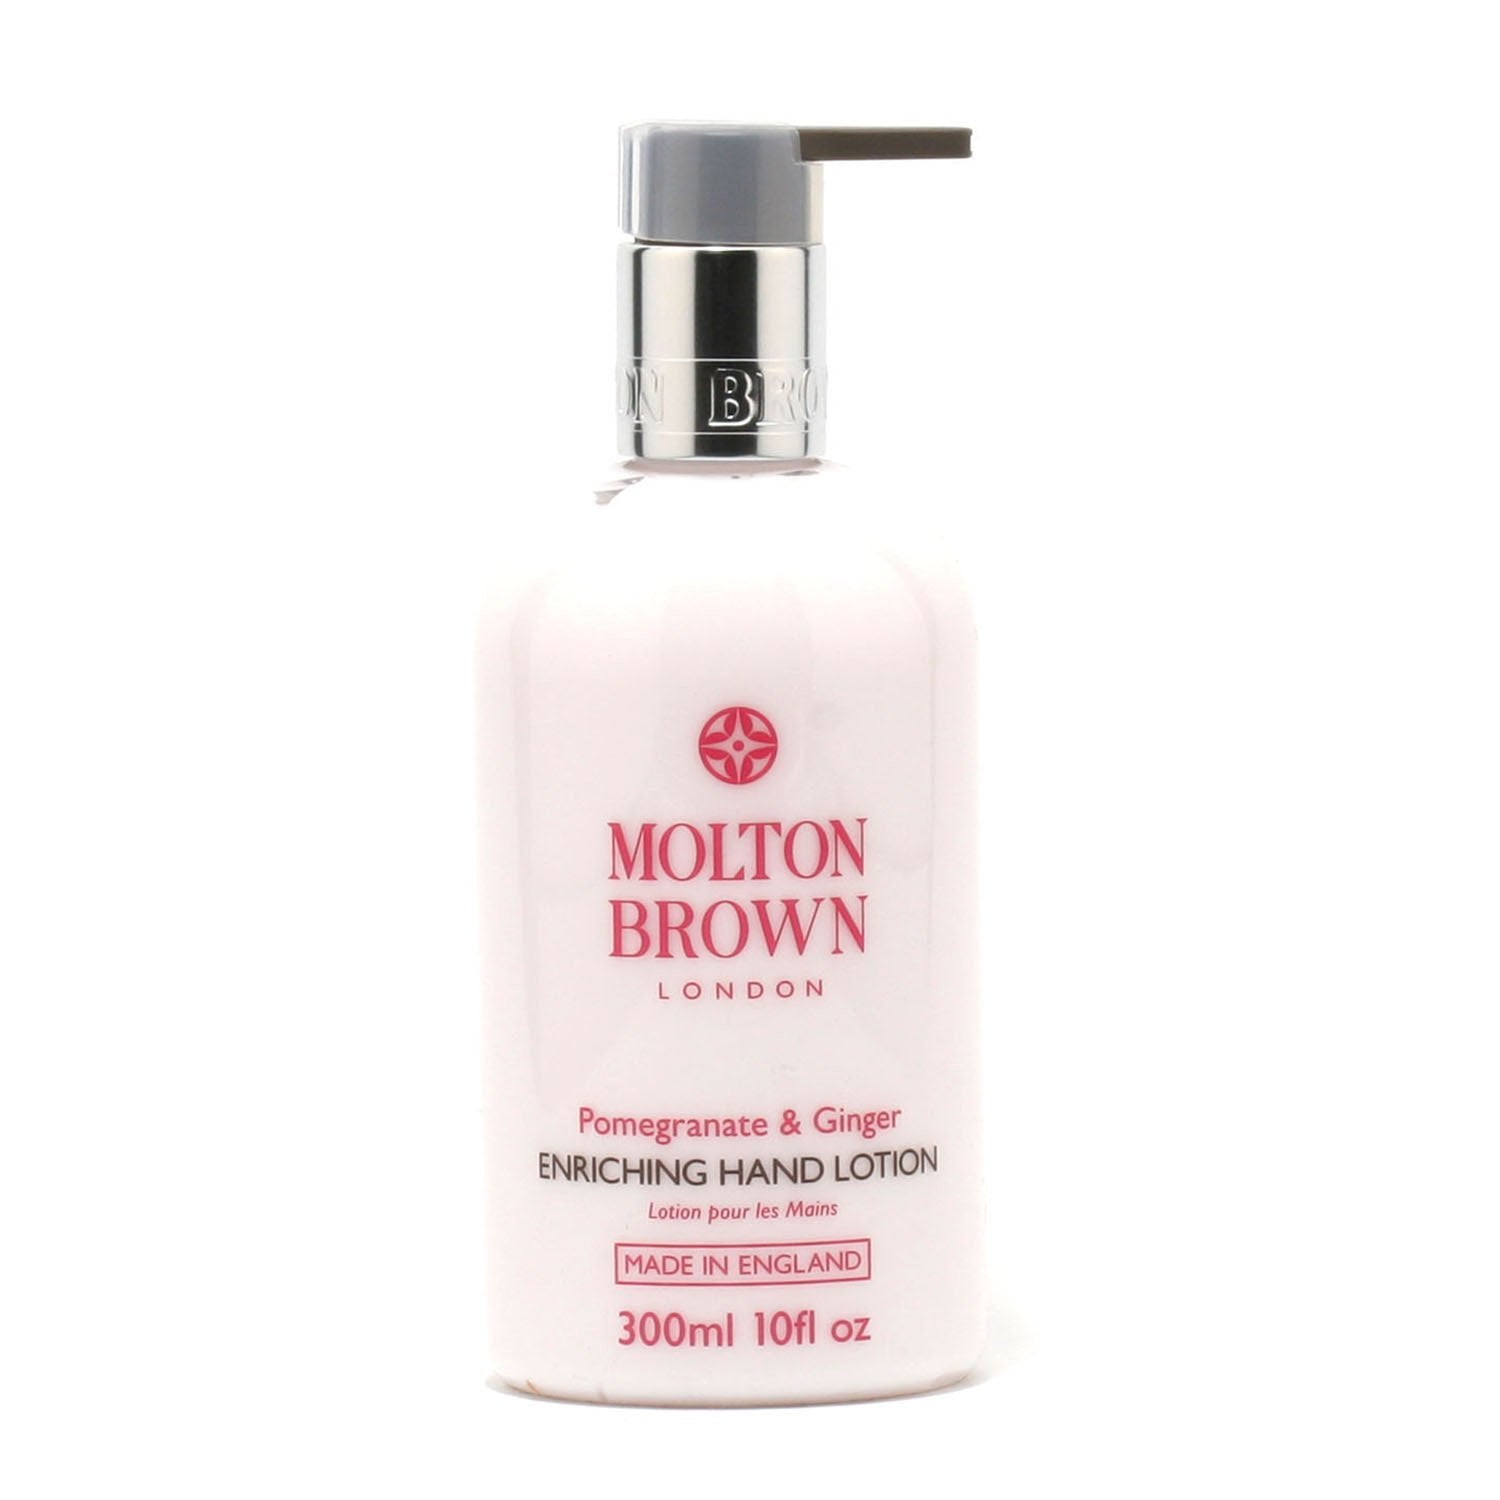 Bath And Body - MOLTON BROWN POMEGRANATE & GINGER ENRICHING HAND LOTION, 10.0 OZ